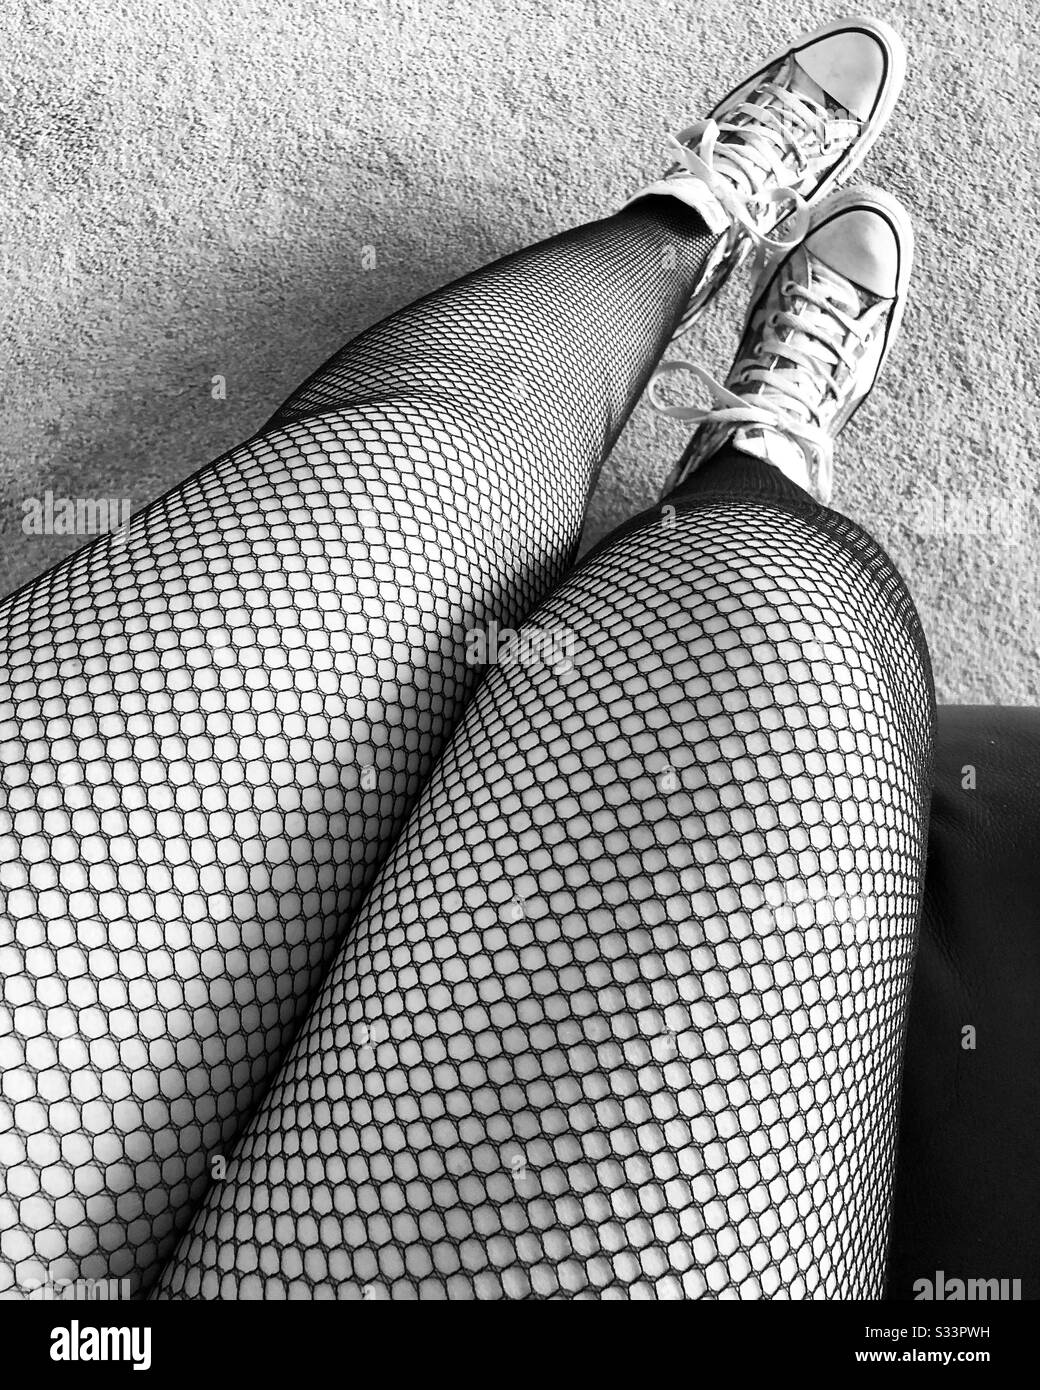 Touching her legs in a seamed fishnet stockings in market